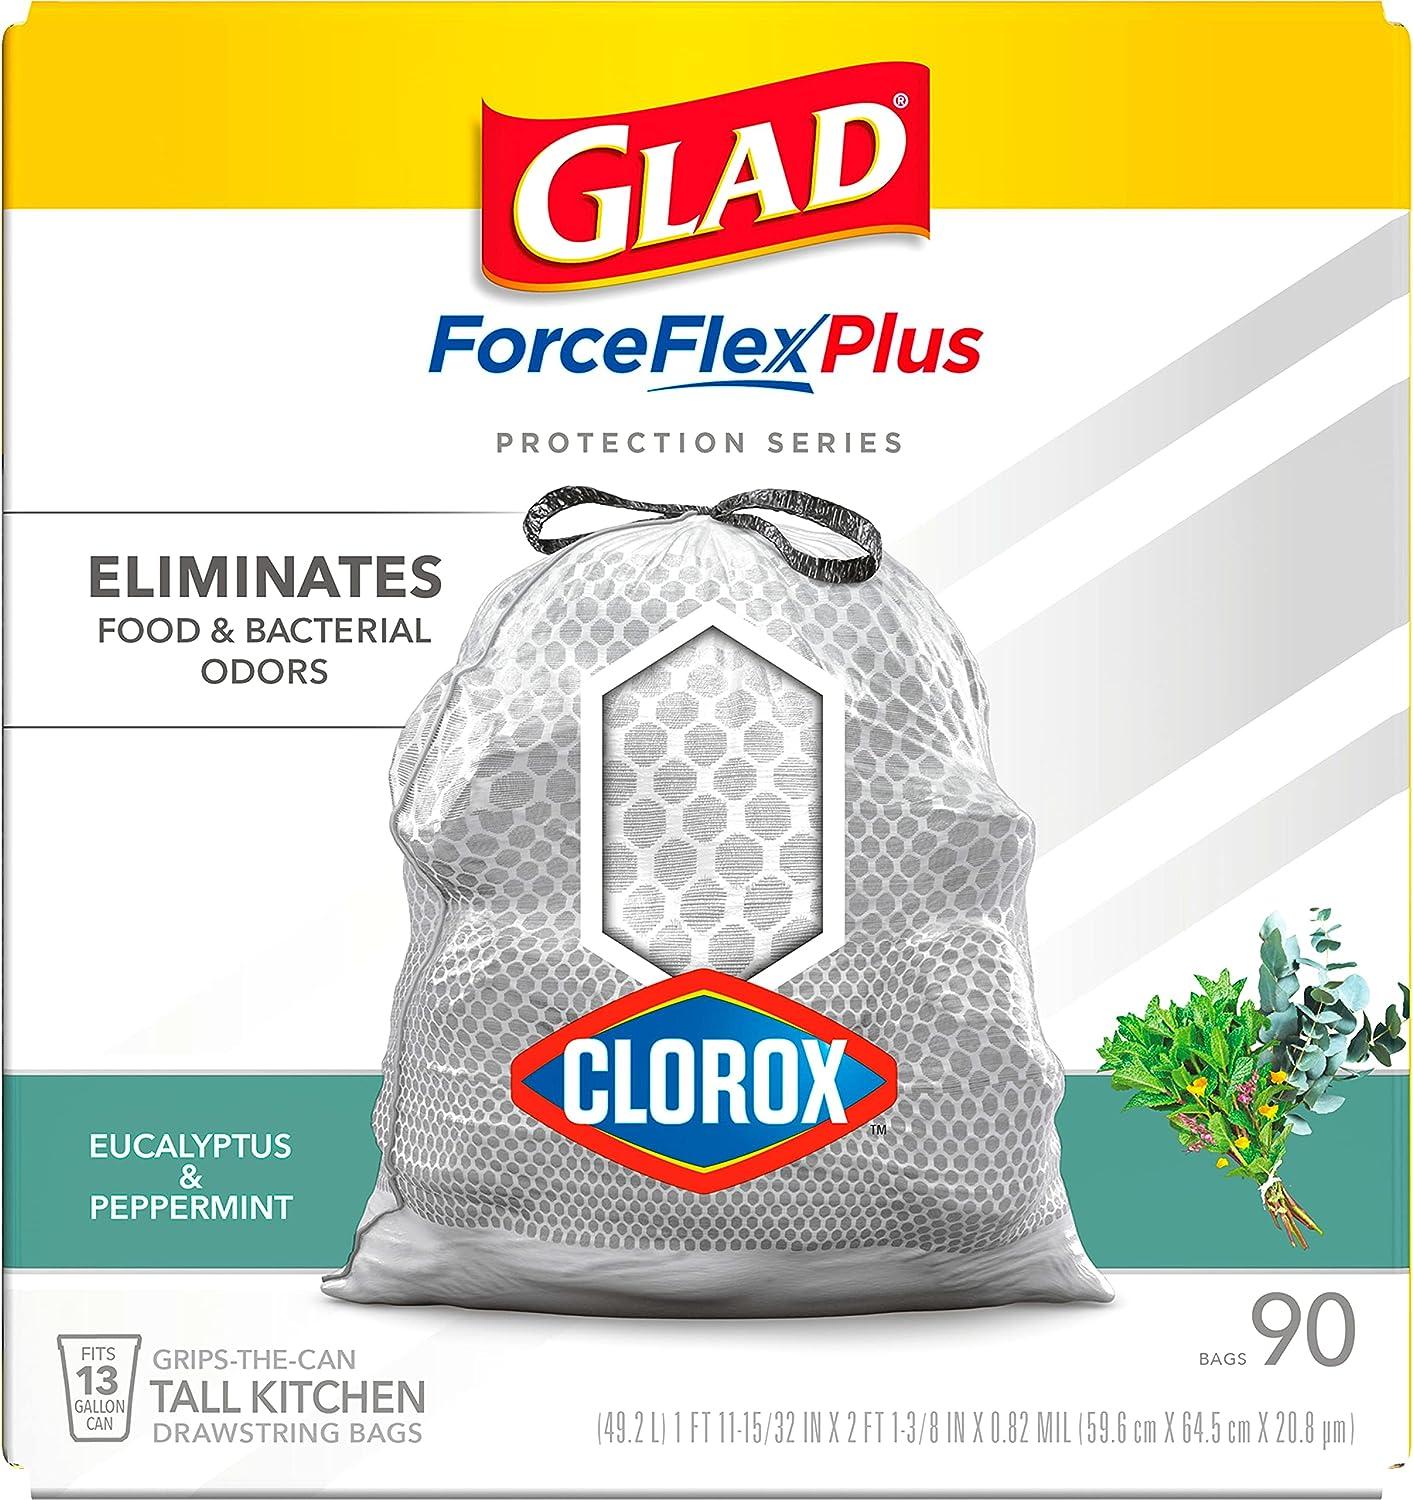 Glad Tall Kitchen Trash Bags ForceFlexPlus with Clorox, 13 Gallon,  Eucalyptus and Peppermint, 90 Count (Package May Vary)